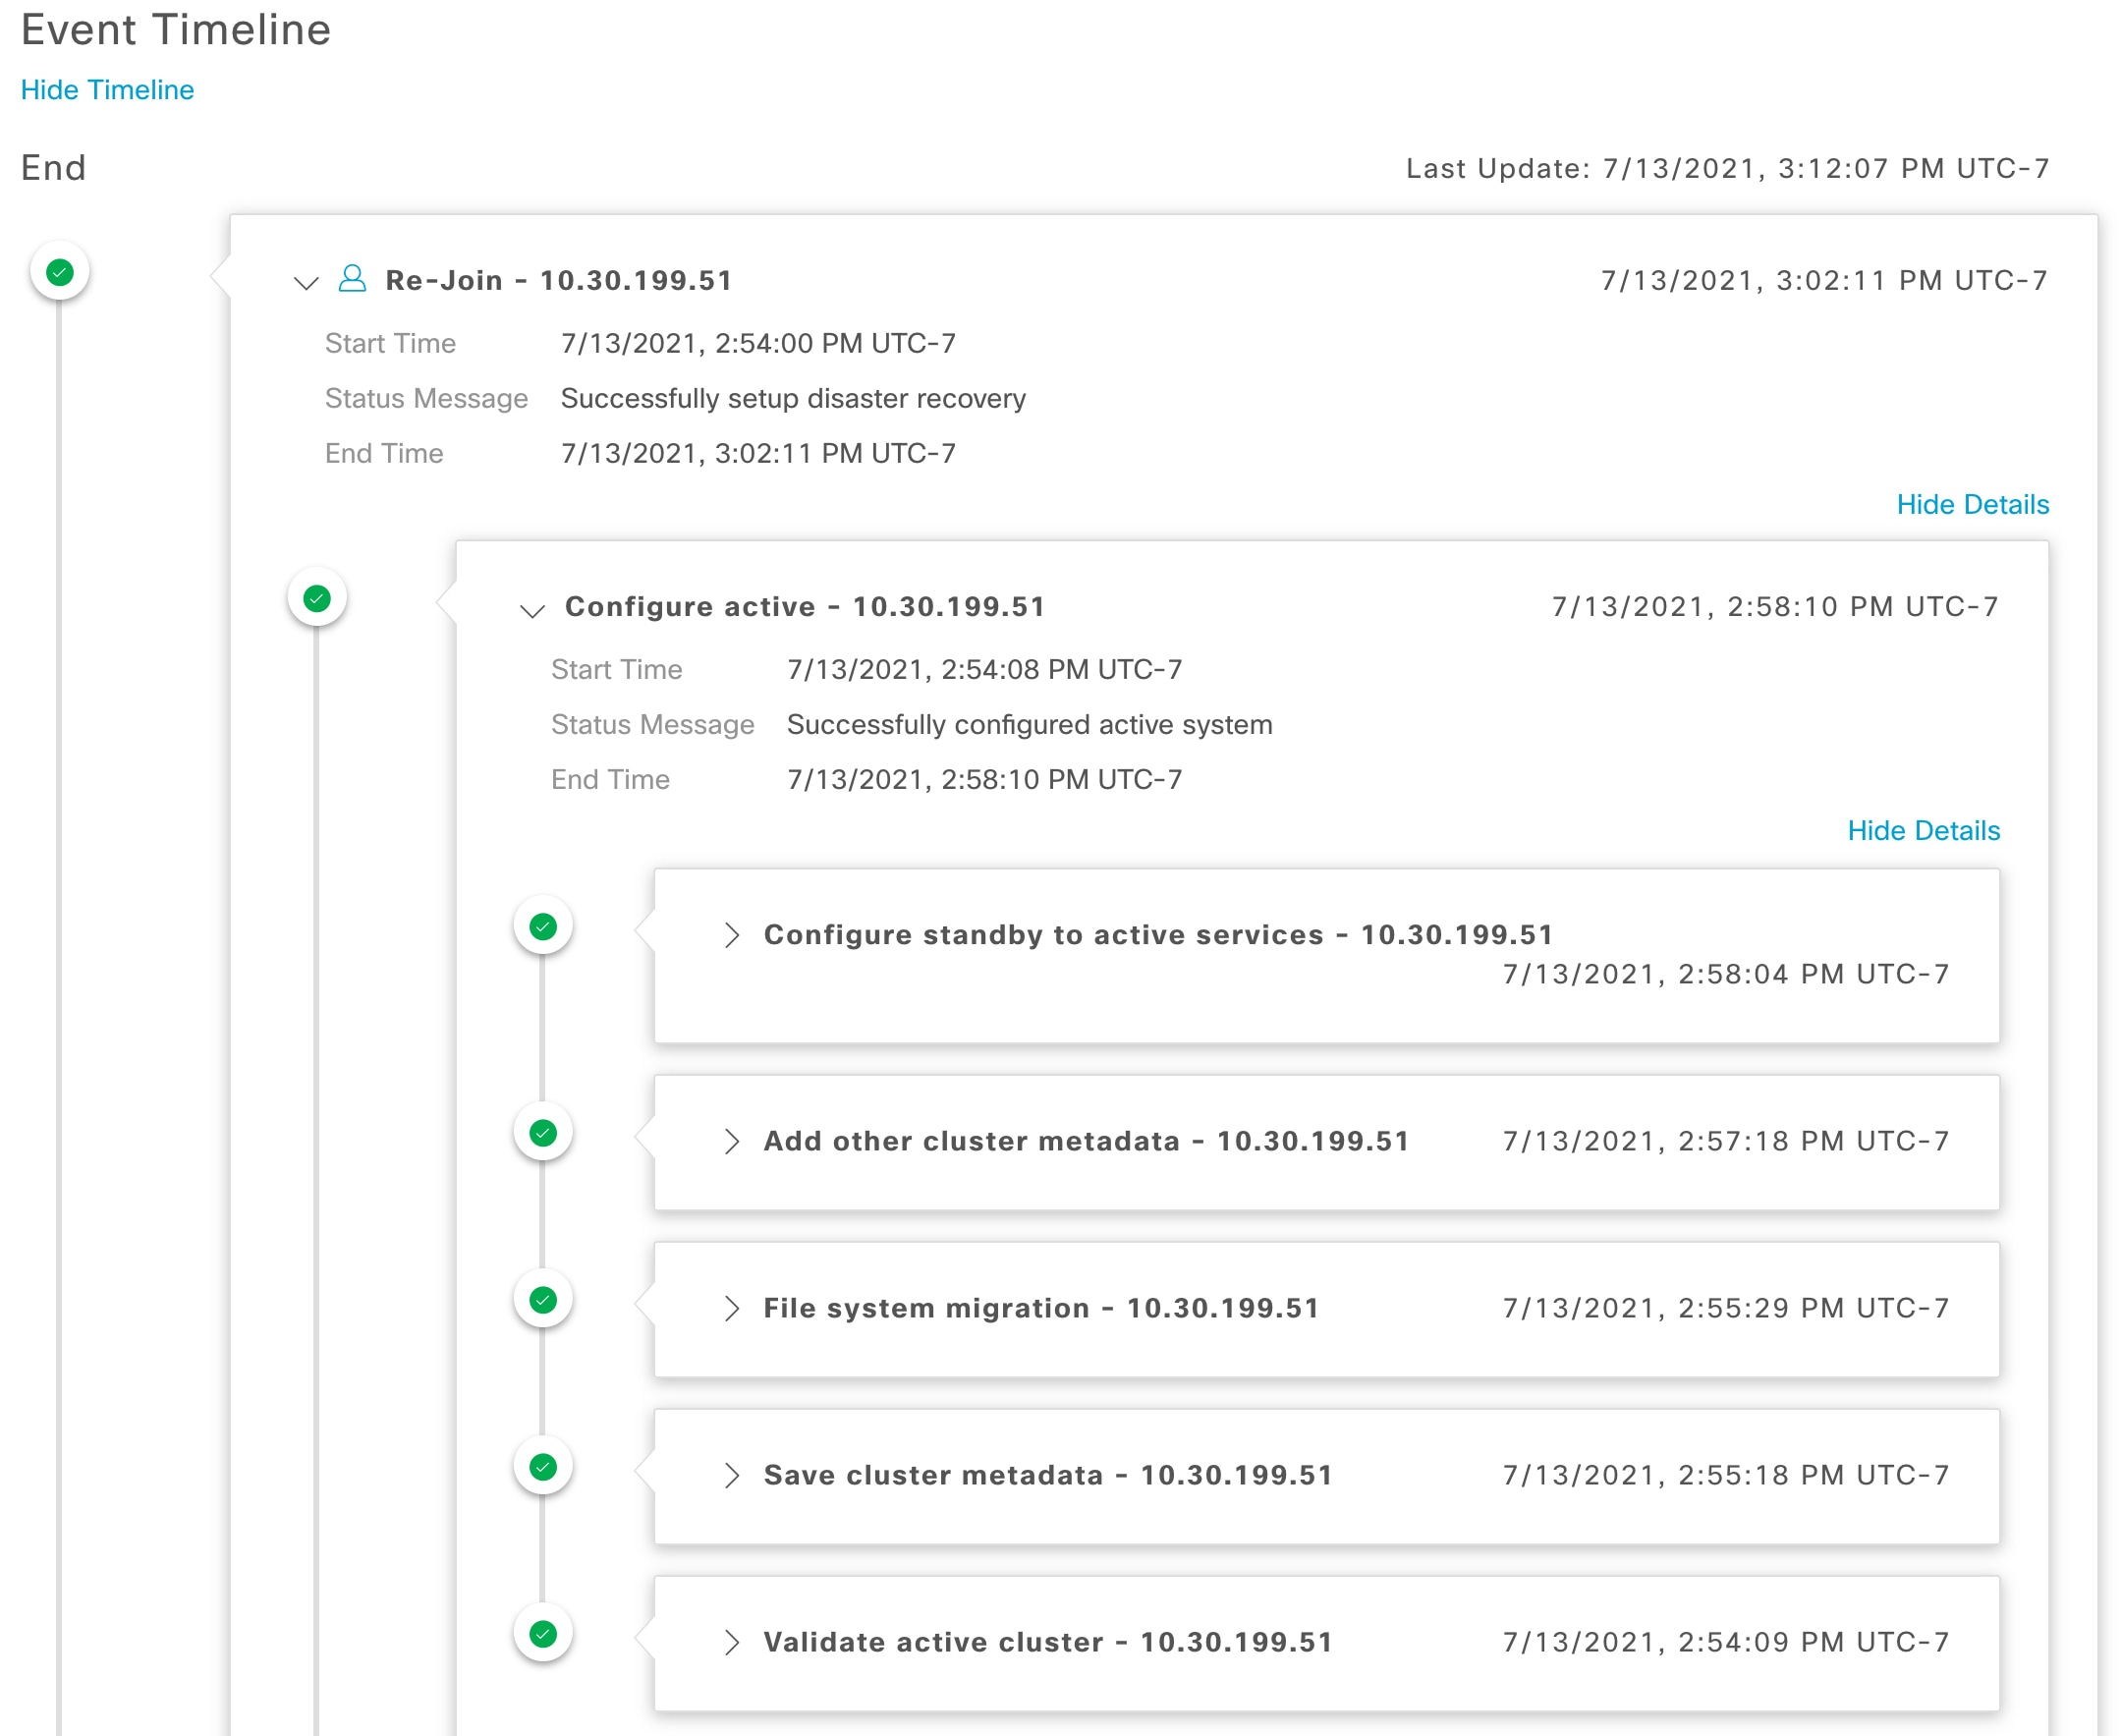 The Monitoring tab of the Cisco DNA Center Disaster Recovery window displays the Event Timeline with the summary of changes in a particular subtask.